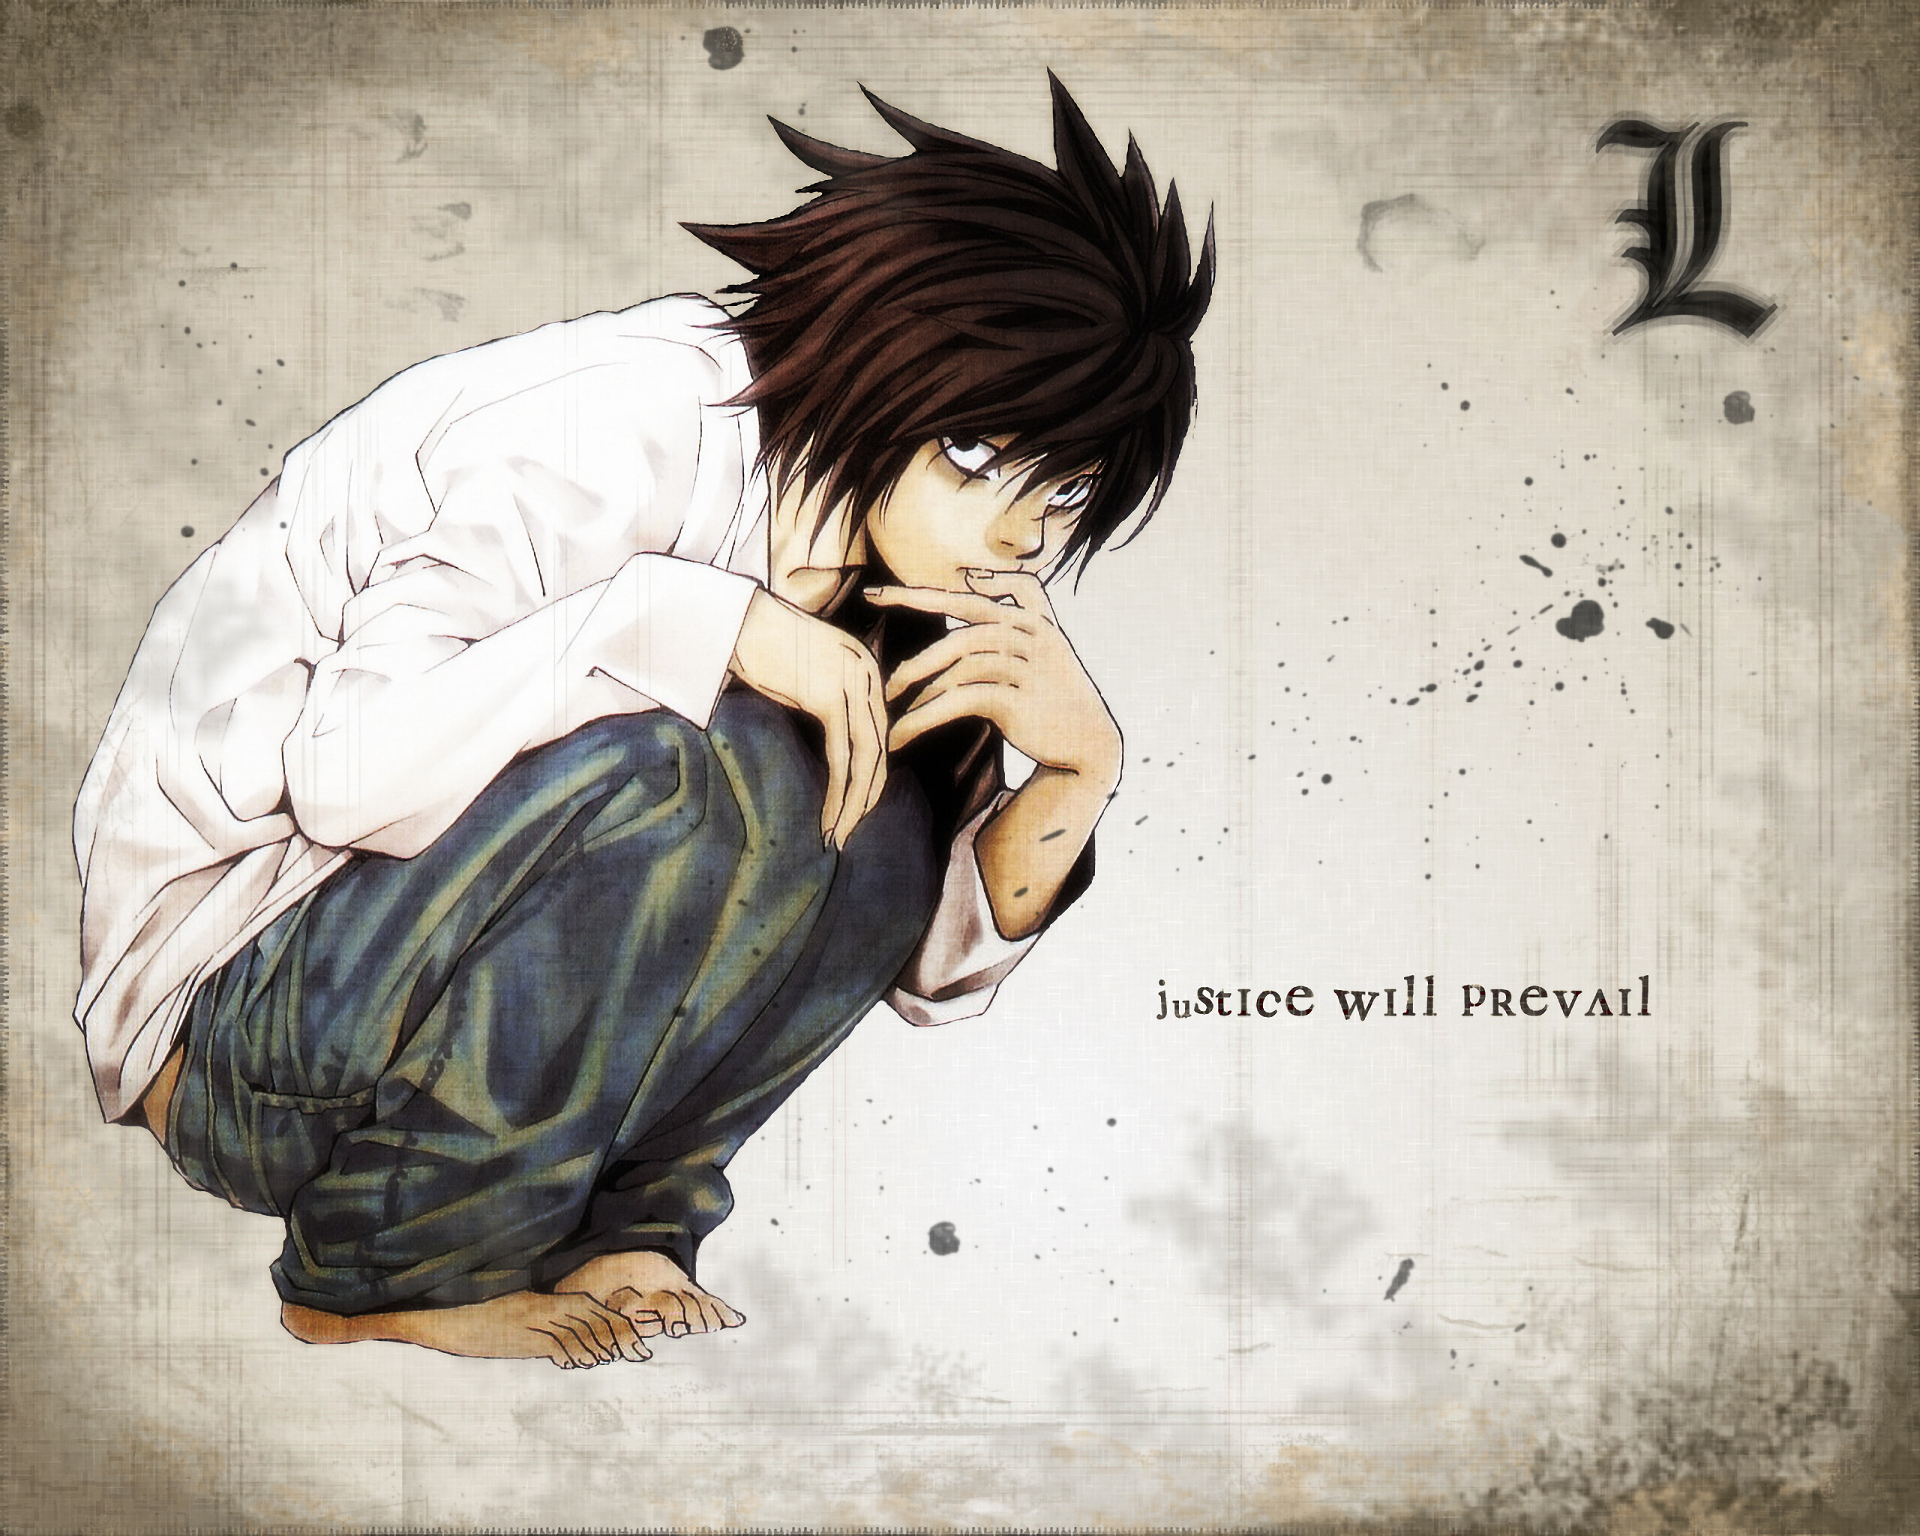 L, the quirky and mysterious detective from the anime Death Note, graces this captivating desktop wallpaper.